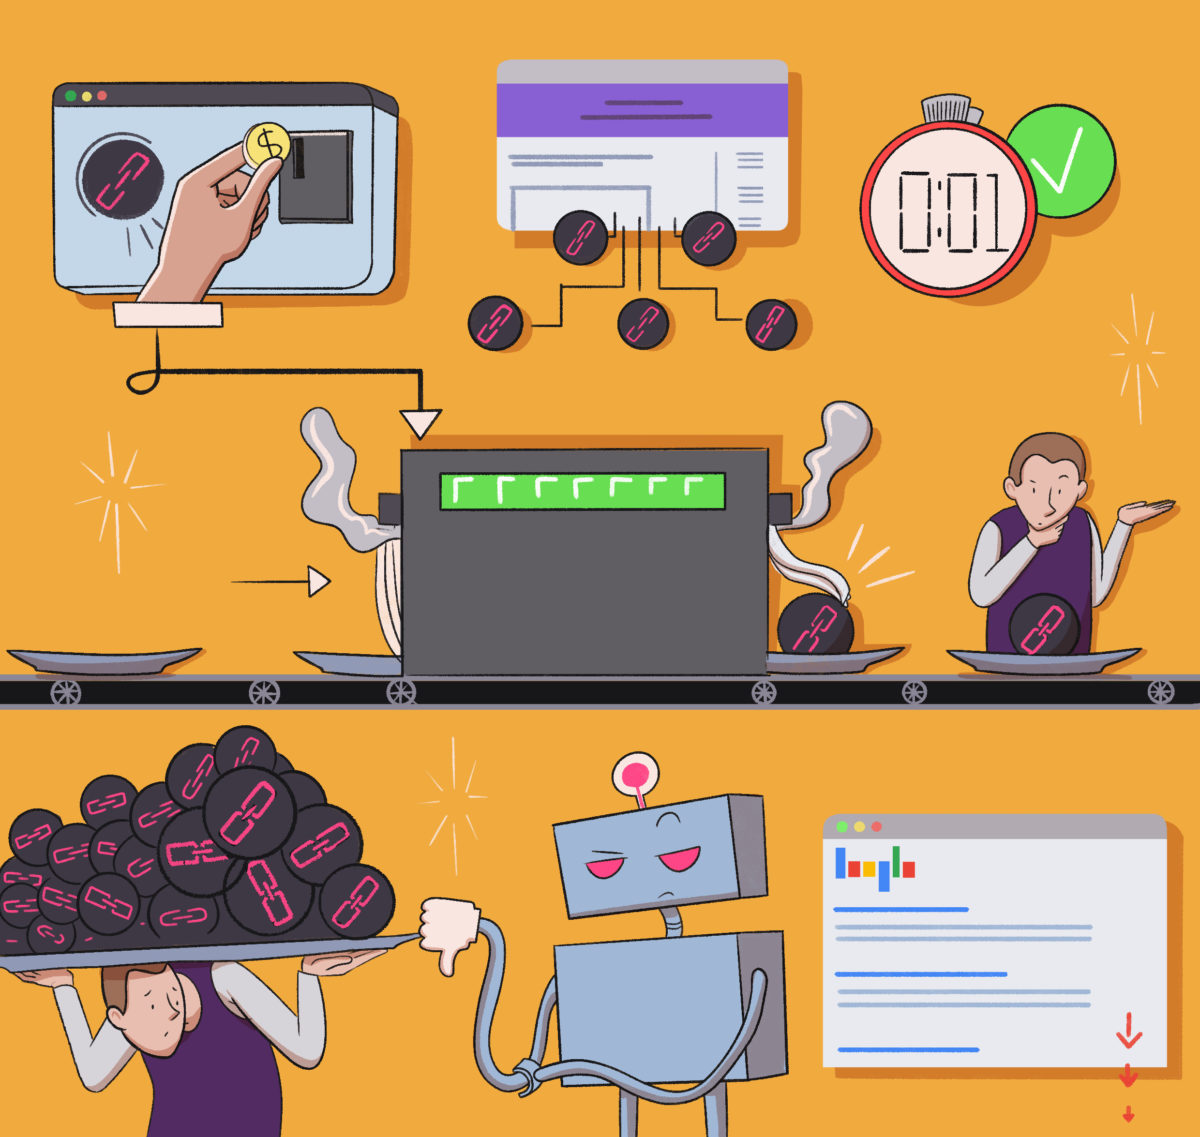 An illustration depicting the concept of website development and maintenance, symbolized by various stages and tasks like coding, testing, launching, bug fixing, and monitoring, represented in a whimsical, assembly line format.